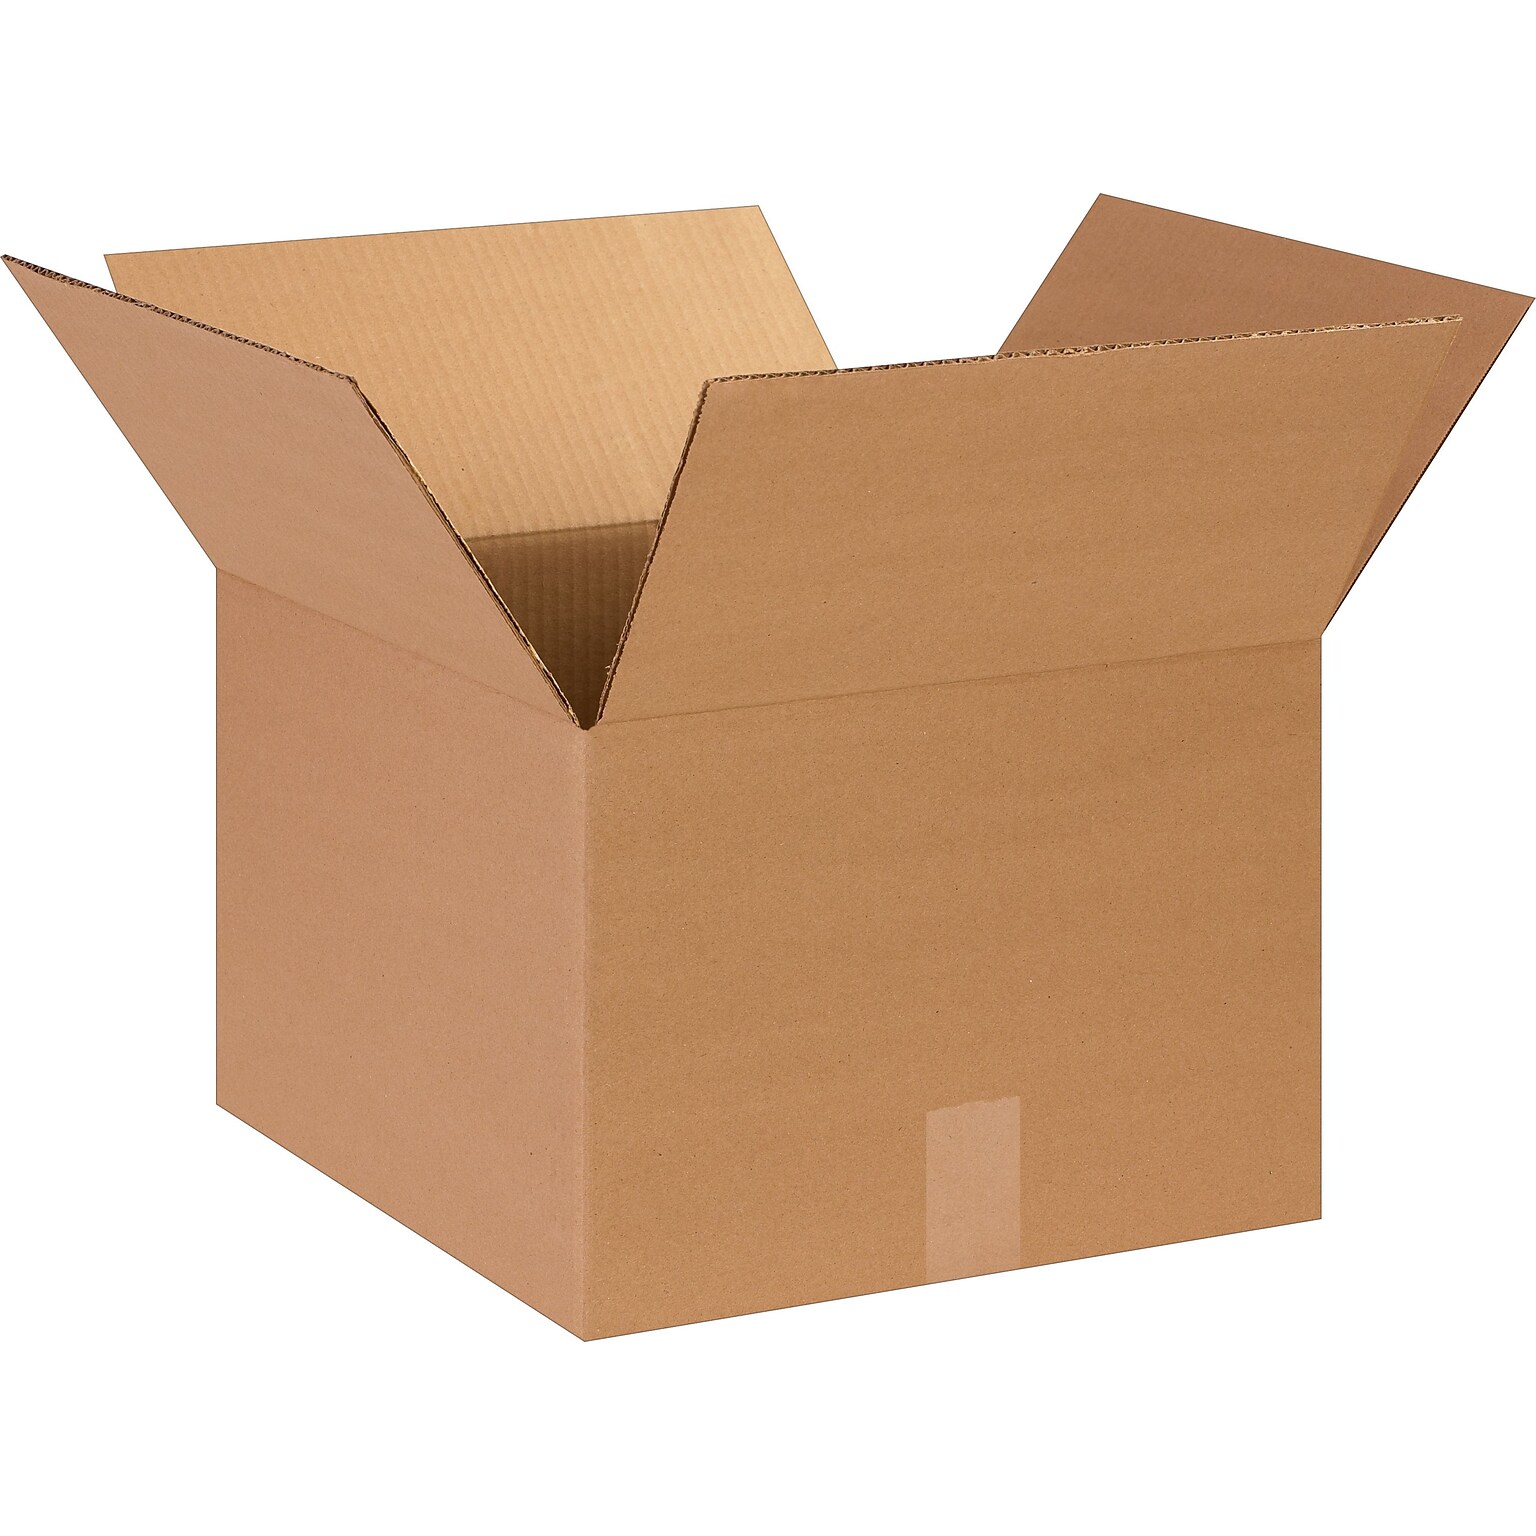 SI Products 14 x 14 x 10 Shipping Boxes, 32 ECT, Kraft, 25/Bundle (BS141410)